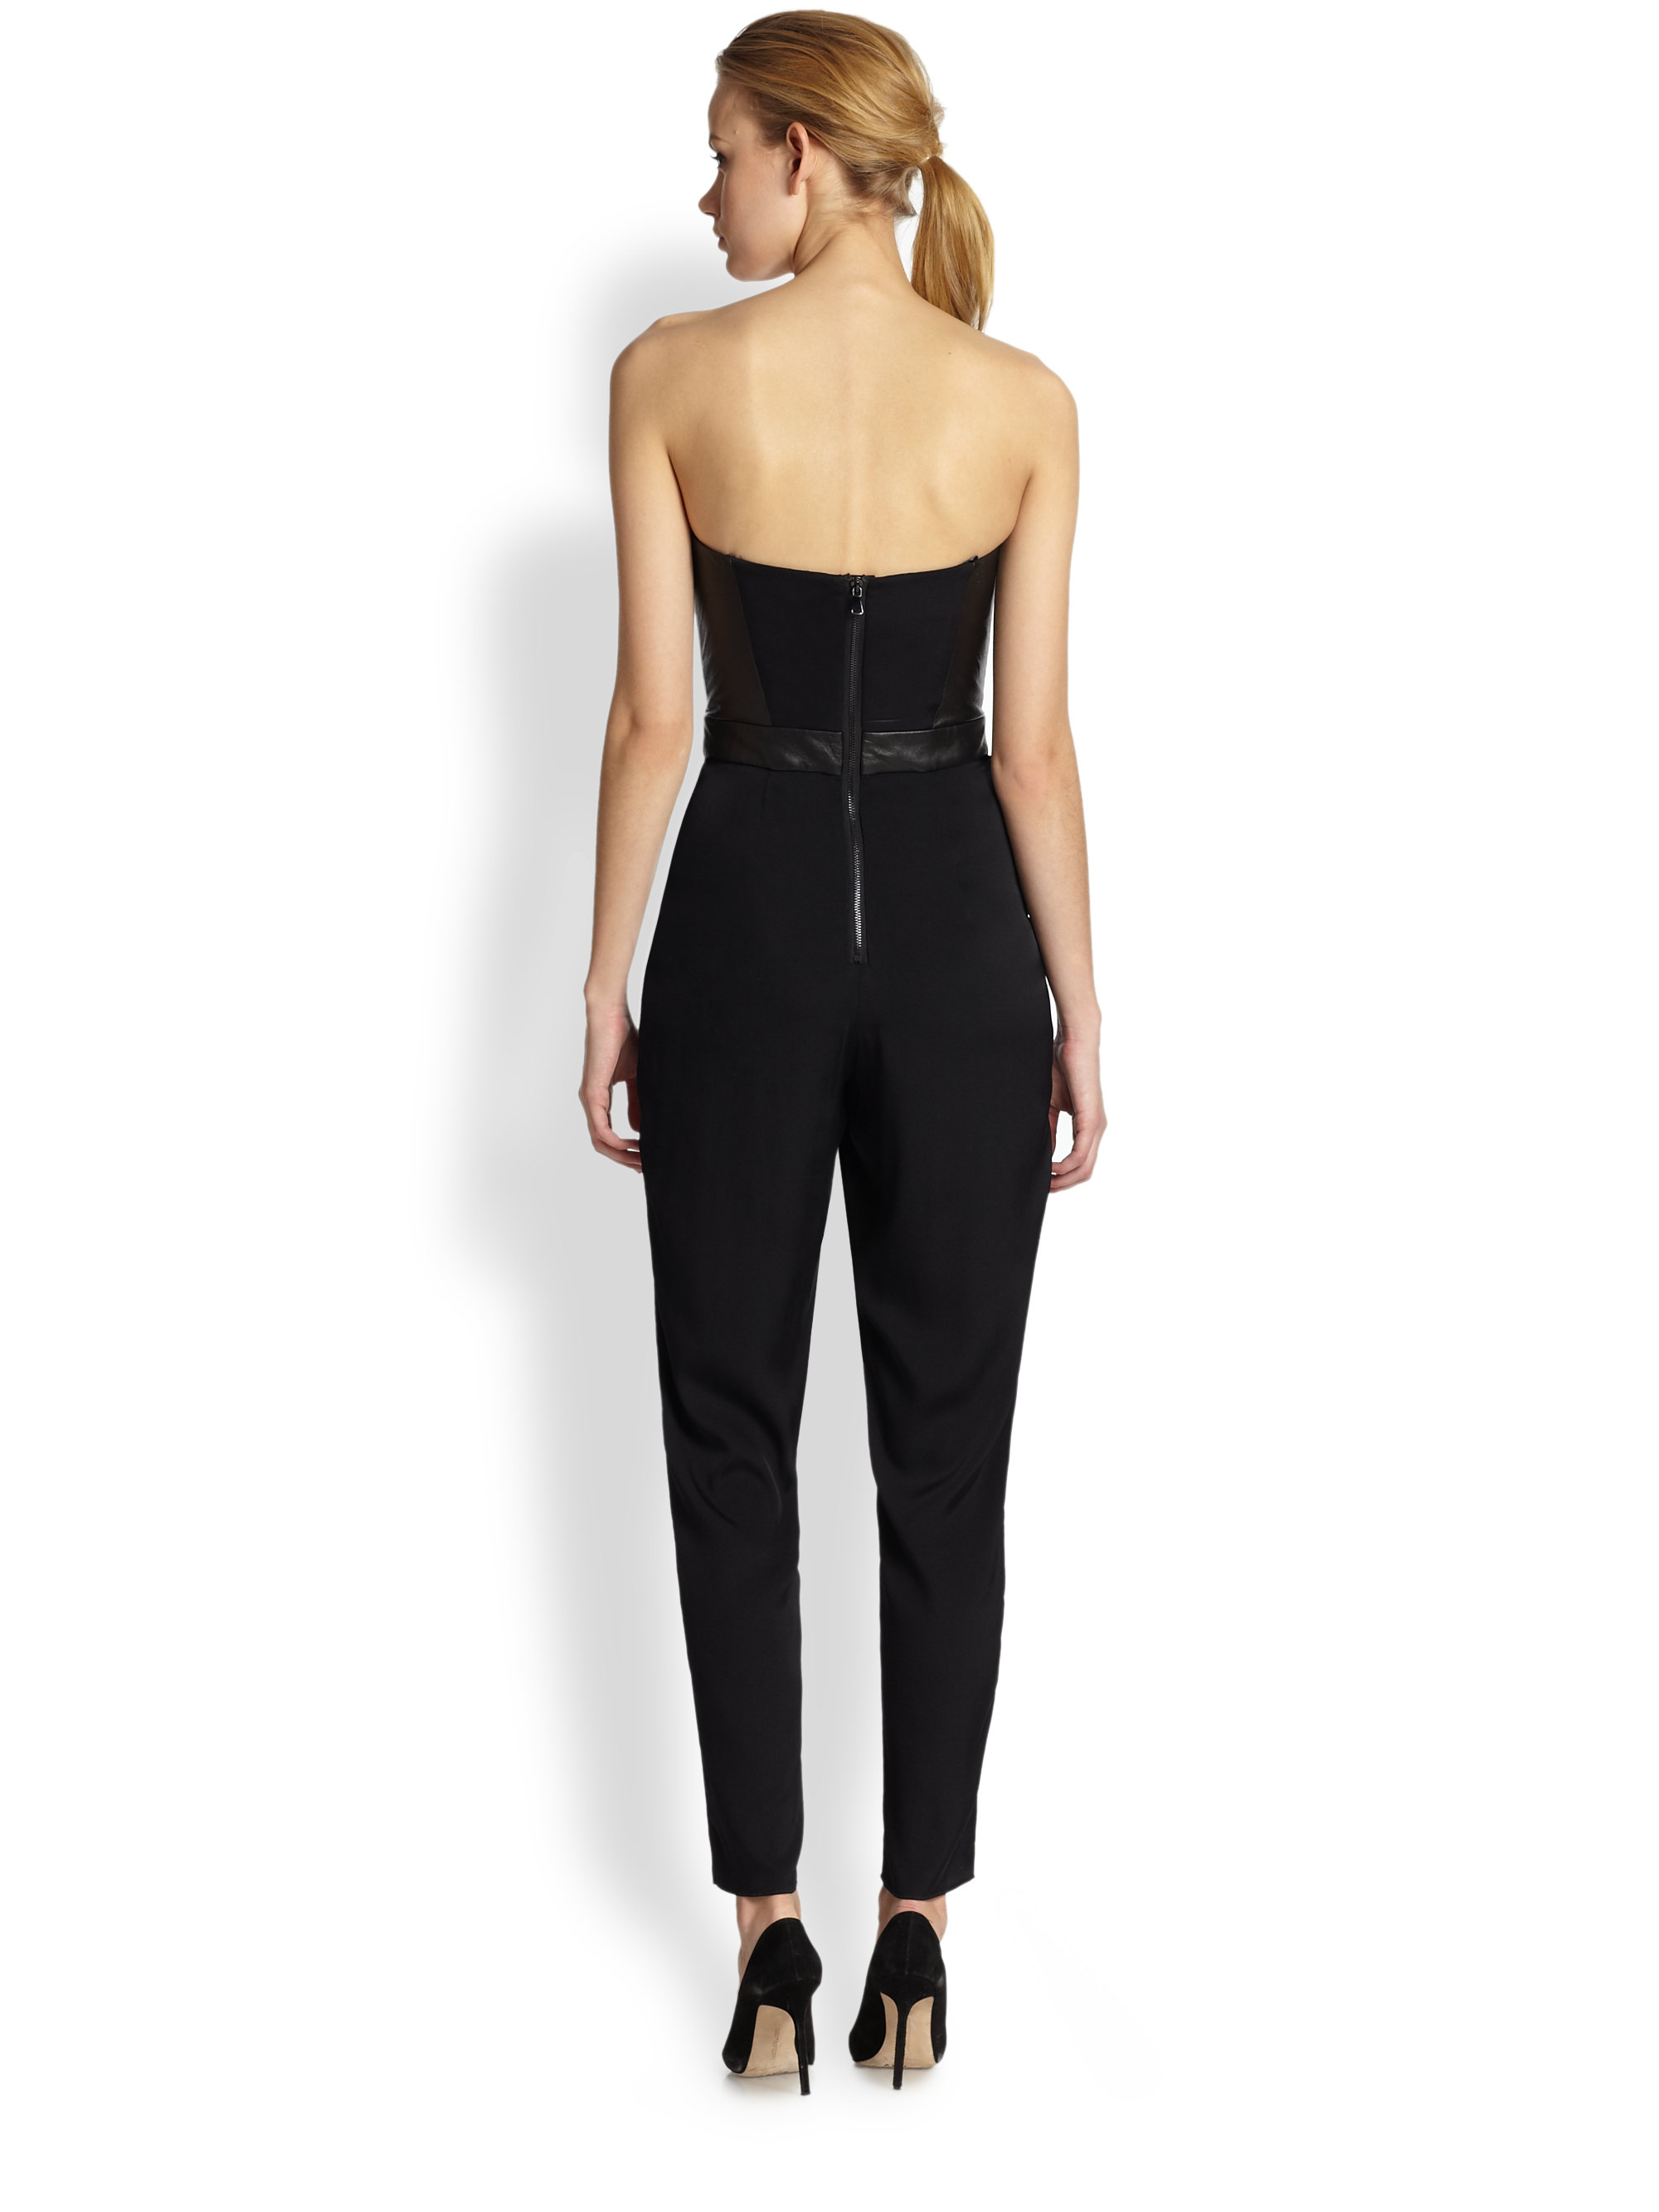 Lyst - Milly Strapless Bustier Jumpsuit in Black